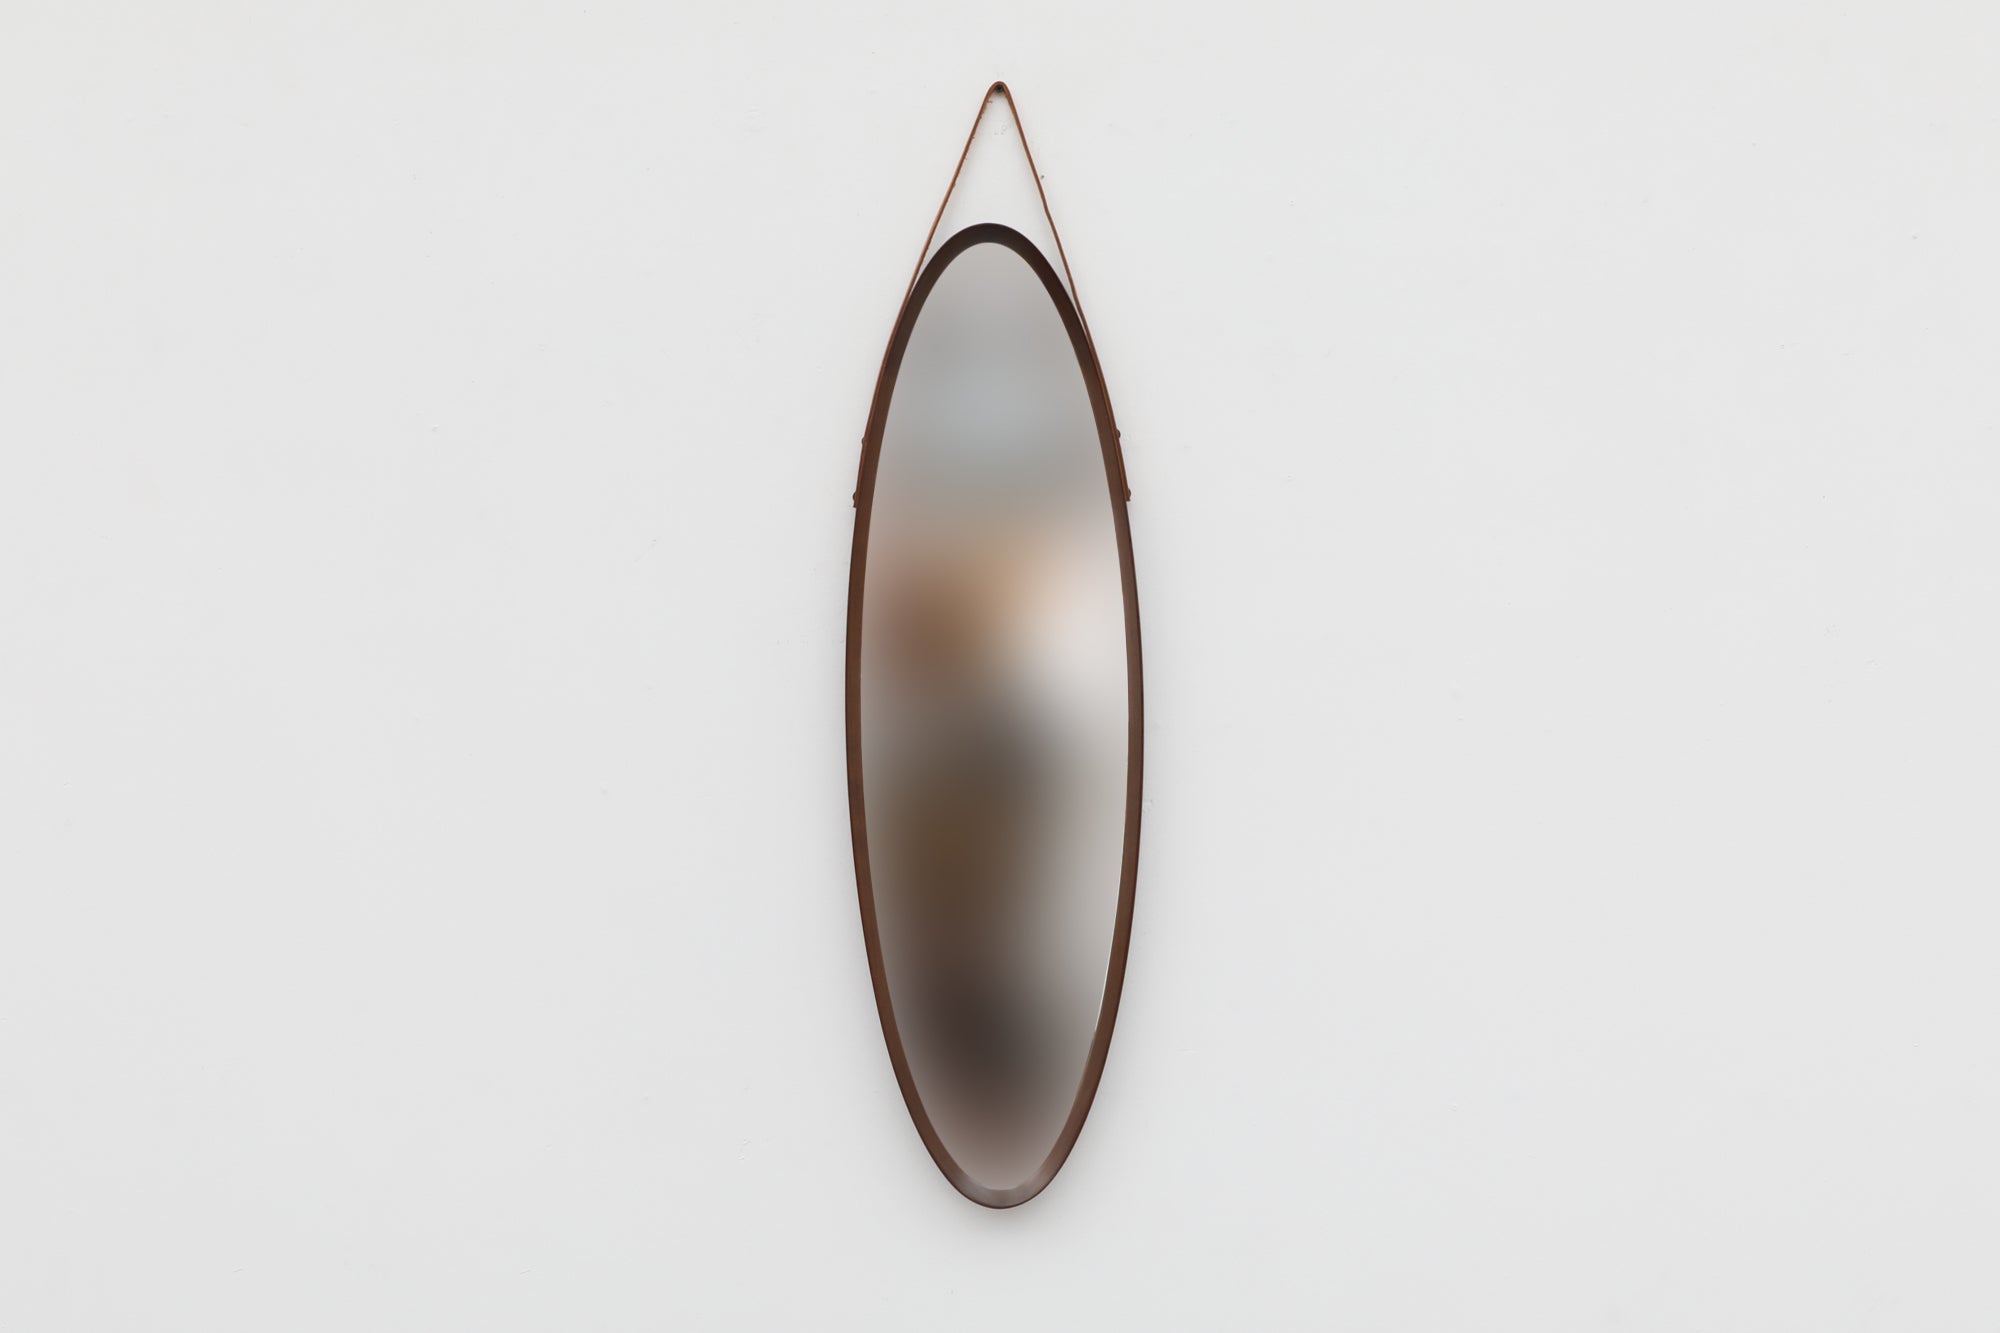 Italian Mid-Century oval wall mounted mirror with teak frame and leather strap in the style of Jacques Adnet. Beautiful solid bent teak framing, in original condition with some wear consistent with its age and use. Other similar mirrors available